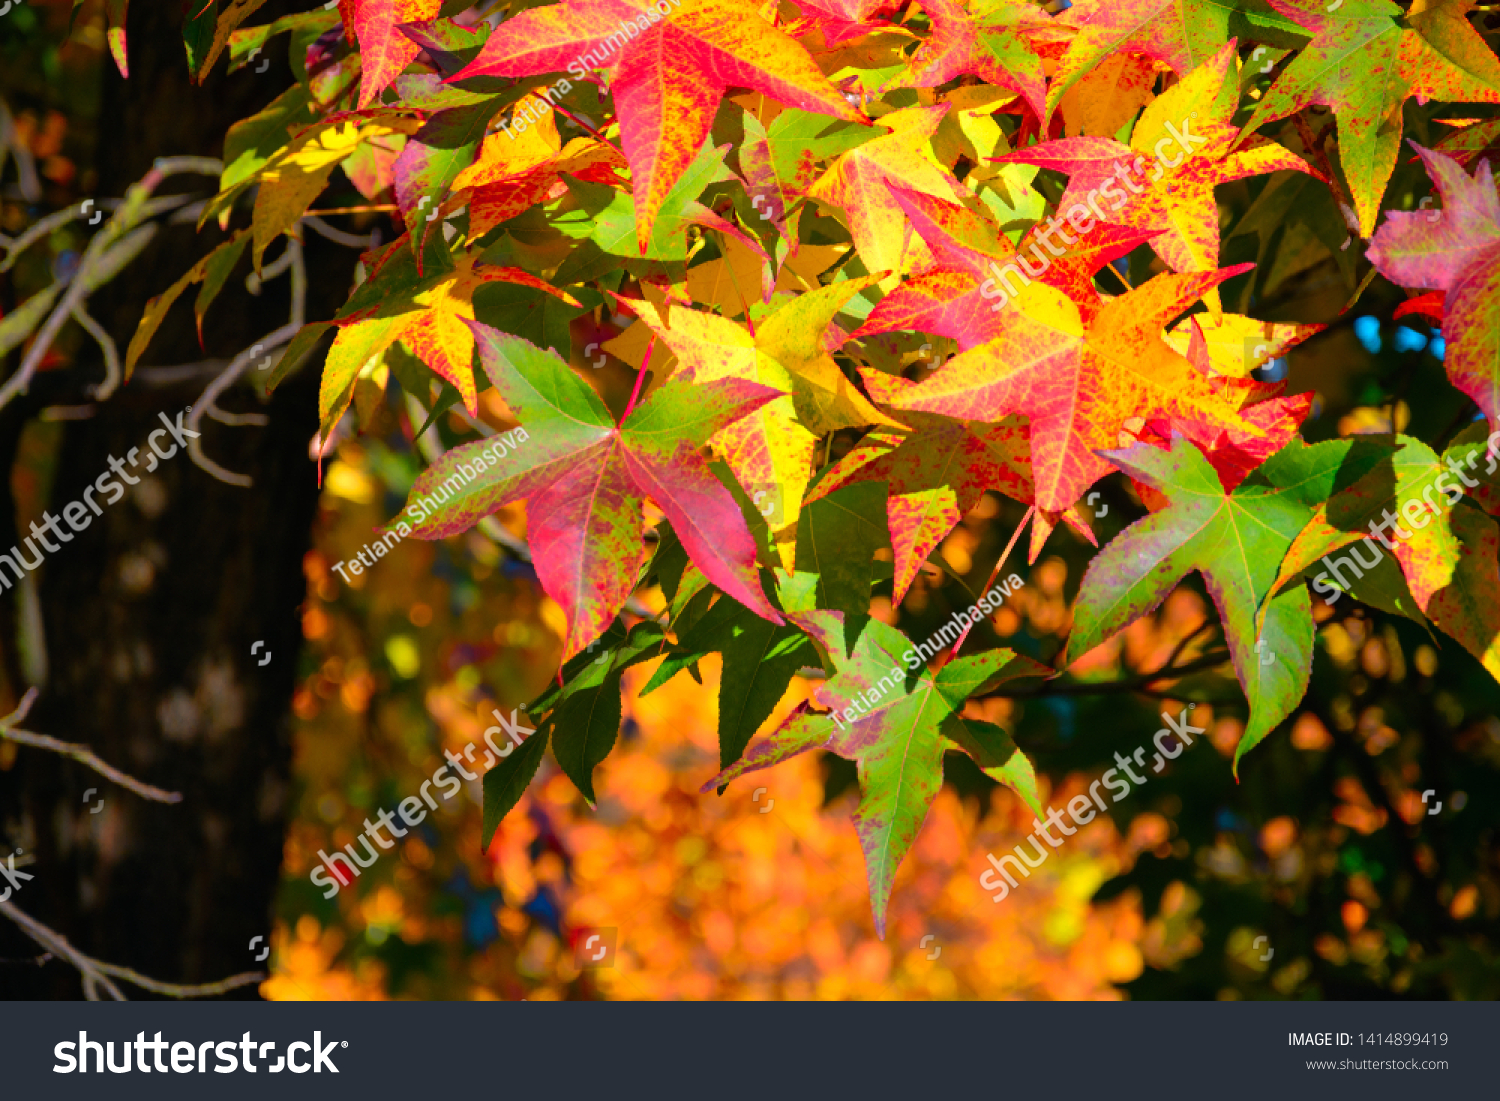 Maple foliage in sunny day. Autumn background #1414899419